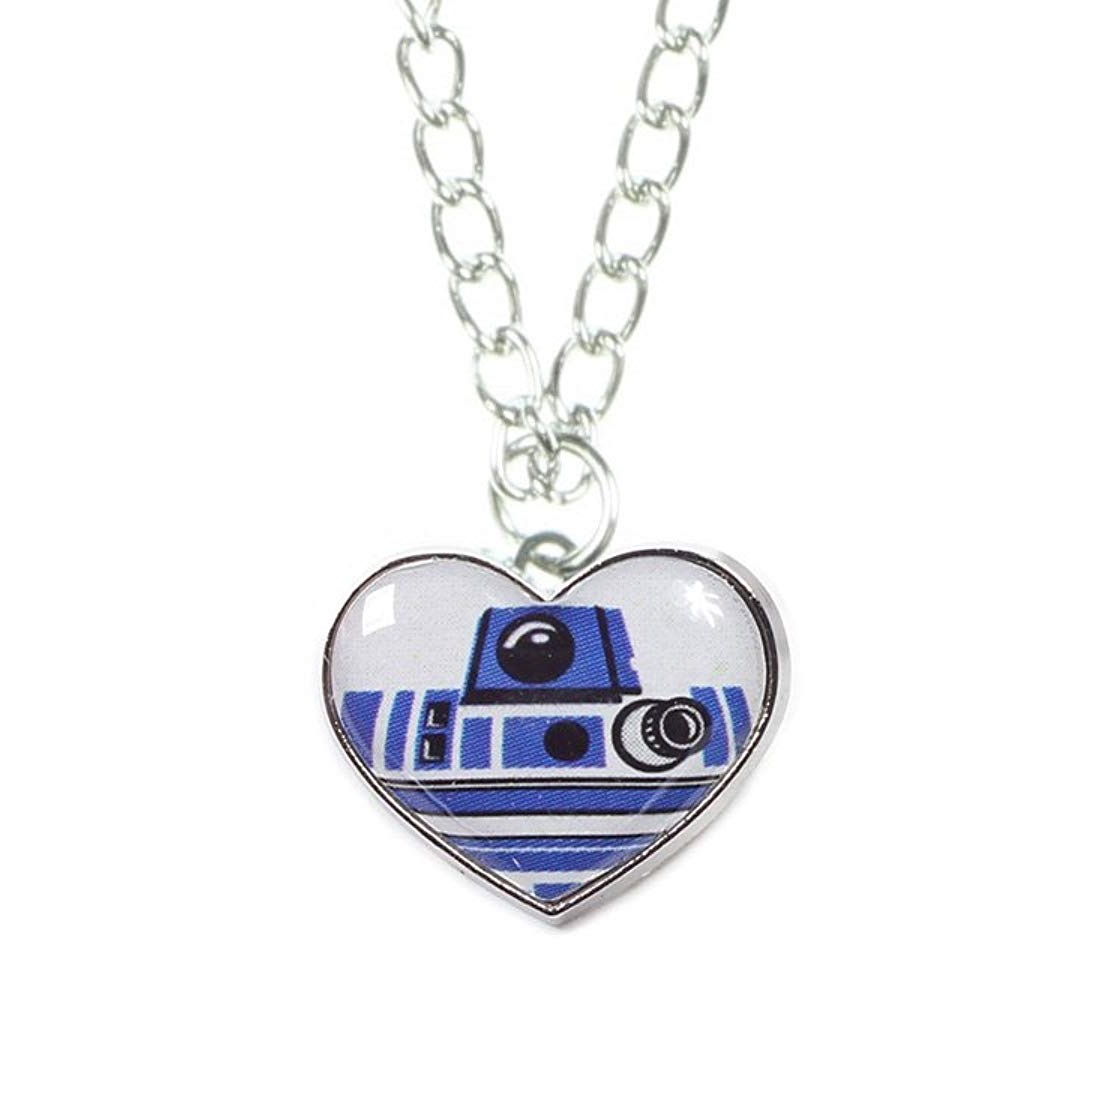 Star Wars R2-D2 heart shaped necklace at Amazon